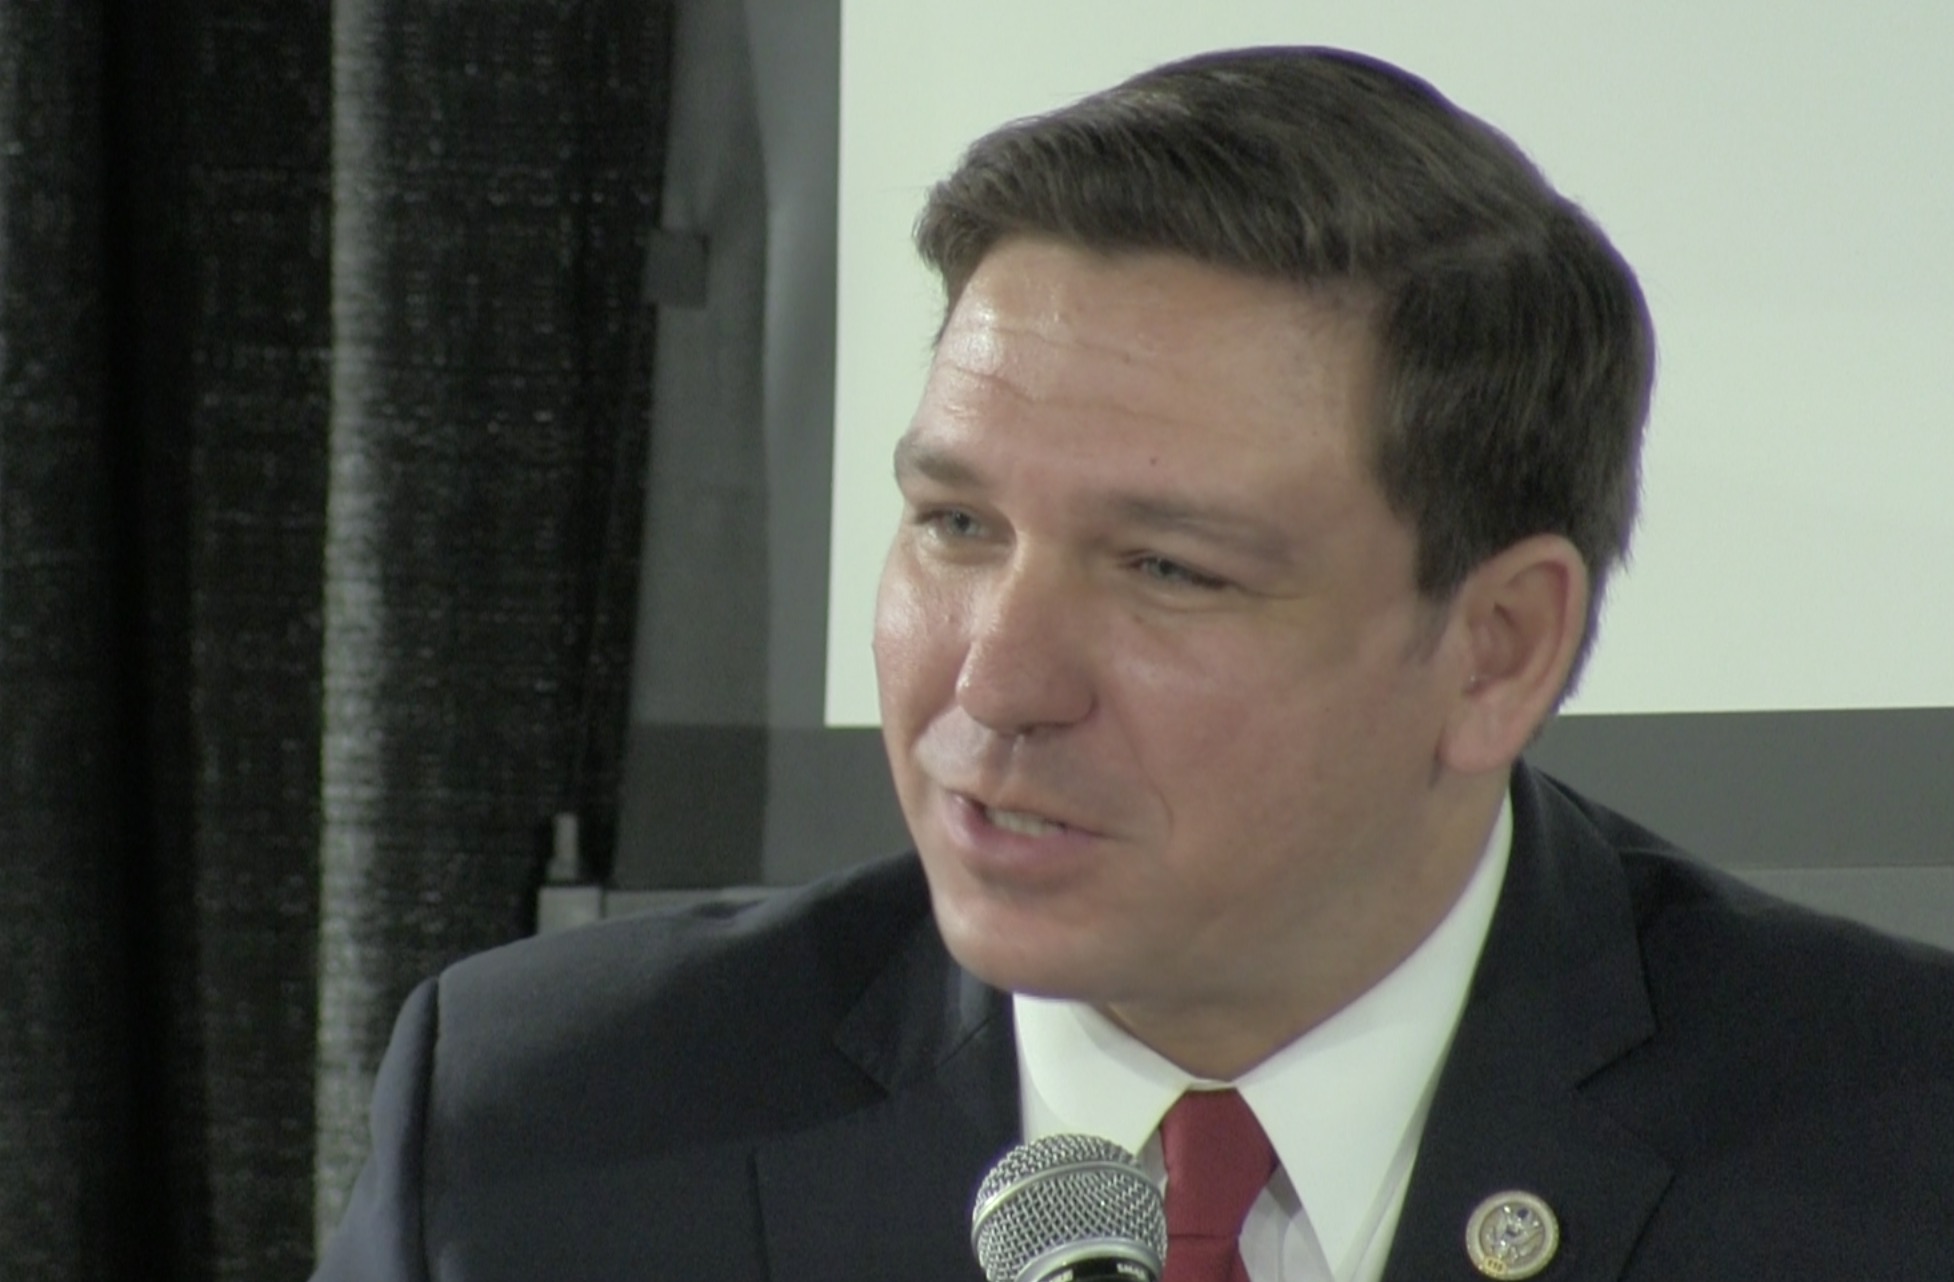 DeSantis' run for governor opens up GOP congressional race